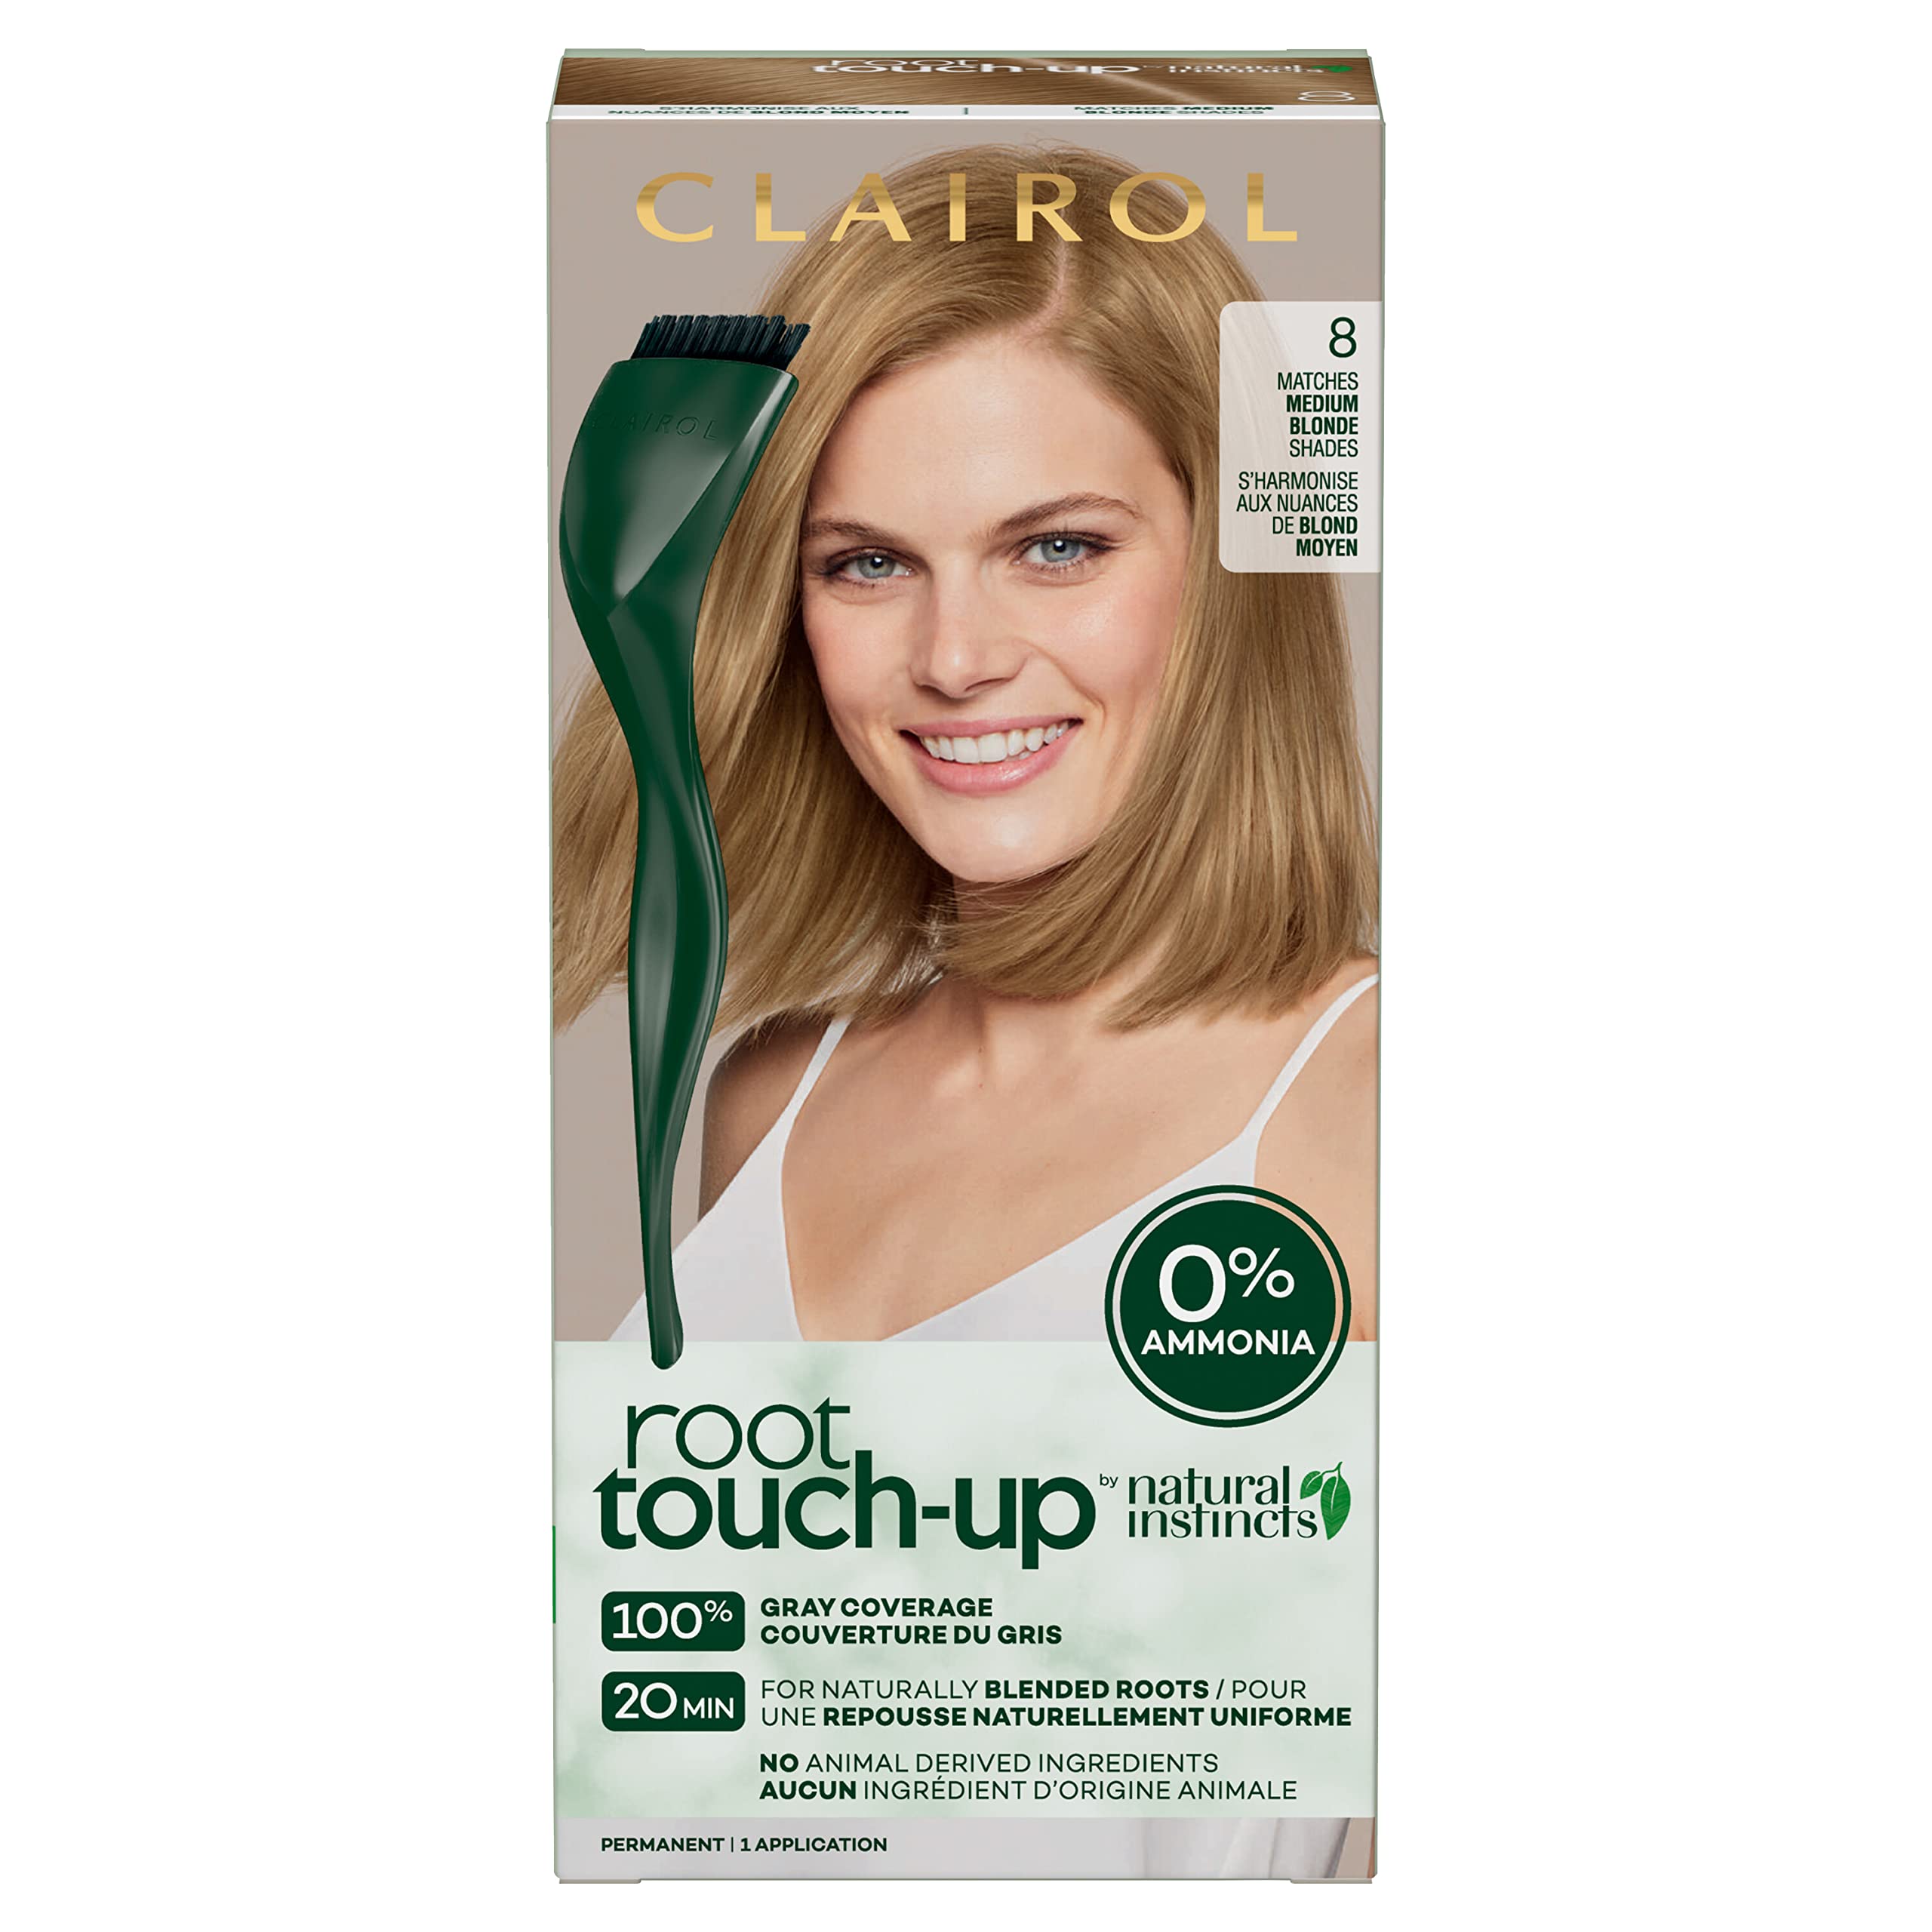 Clairol Root Touch-Up by Natural Instincts Permanent Hair Dye, 8 Medium Blonde Hair Color, Pack of 1